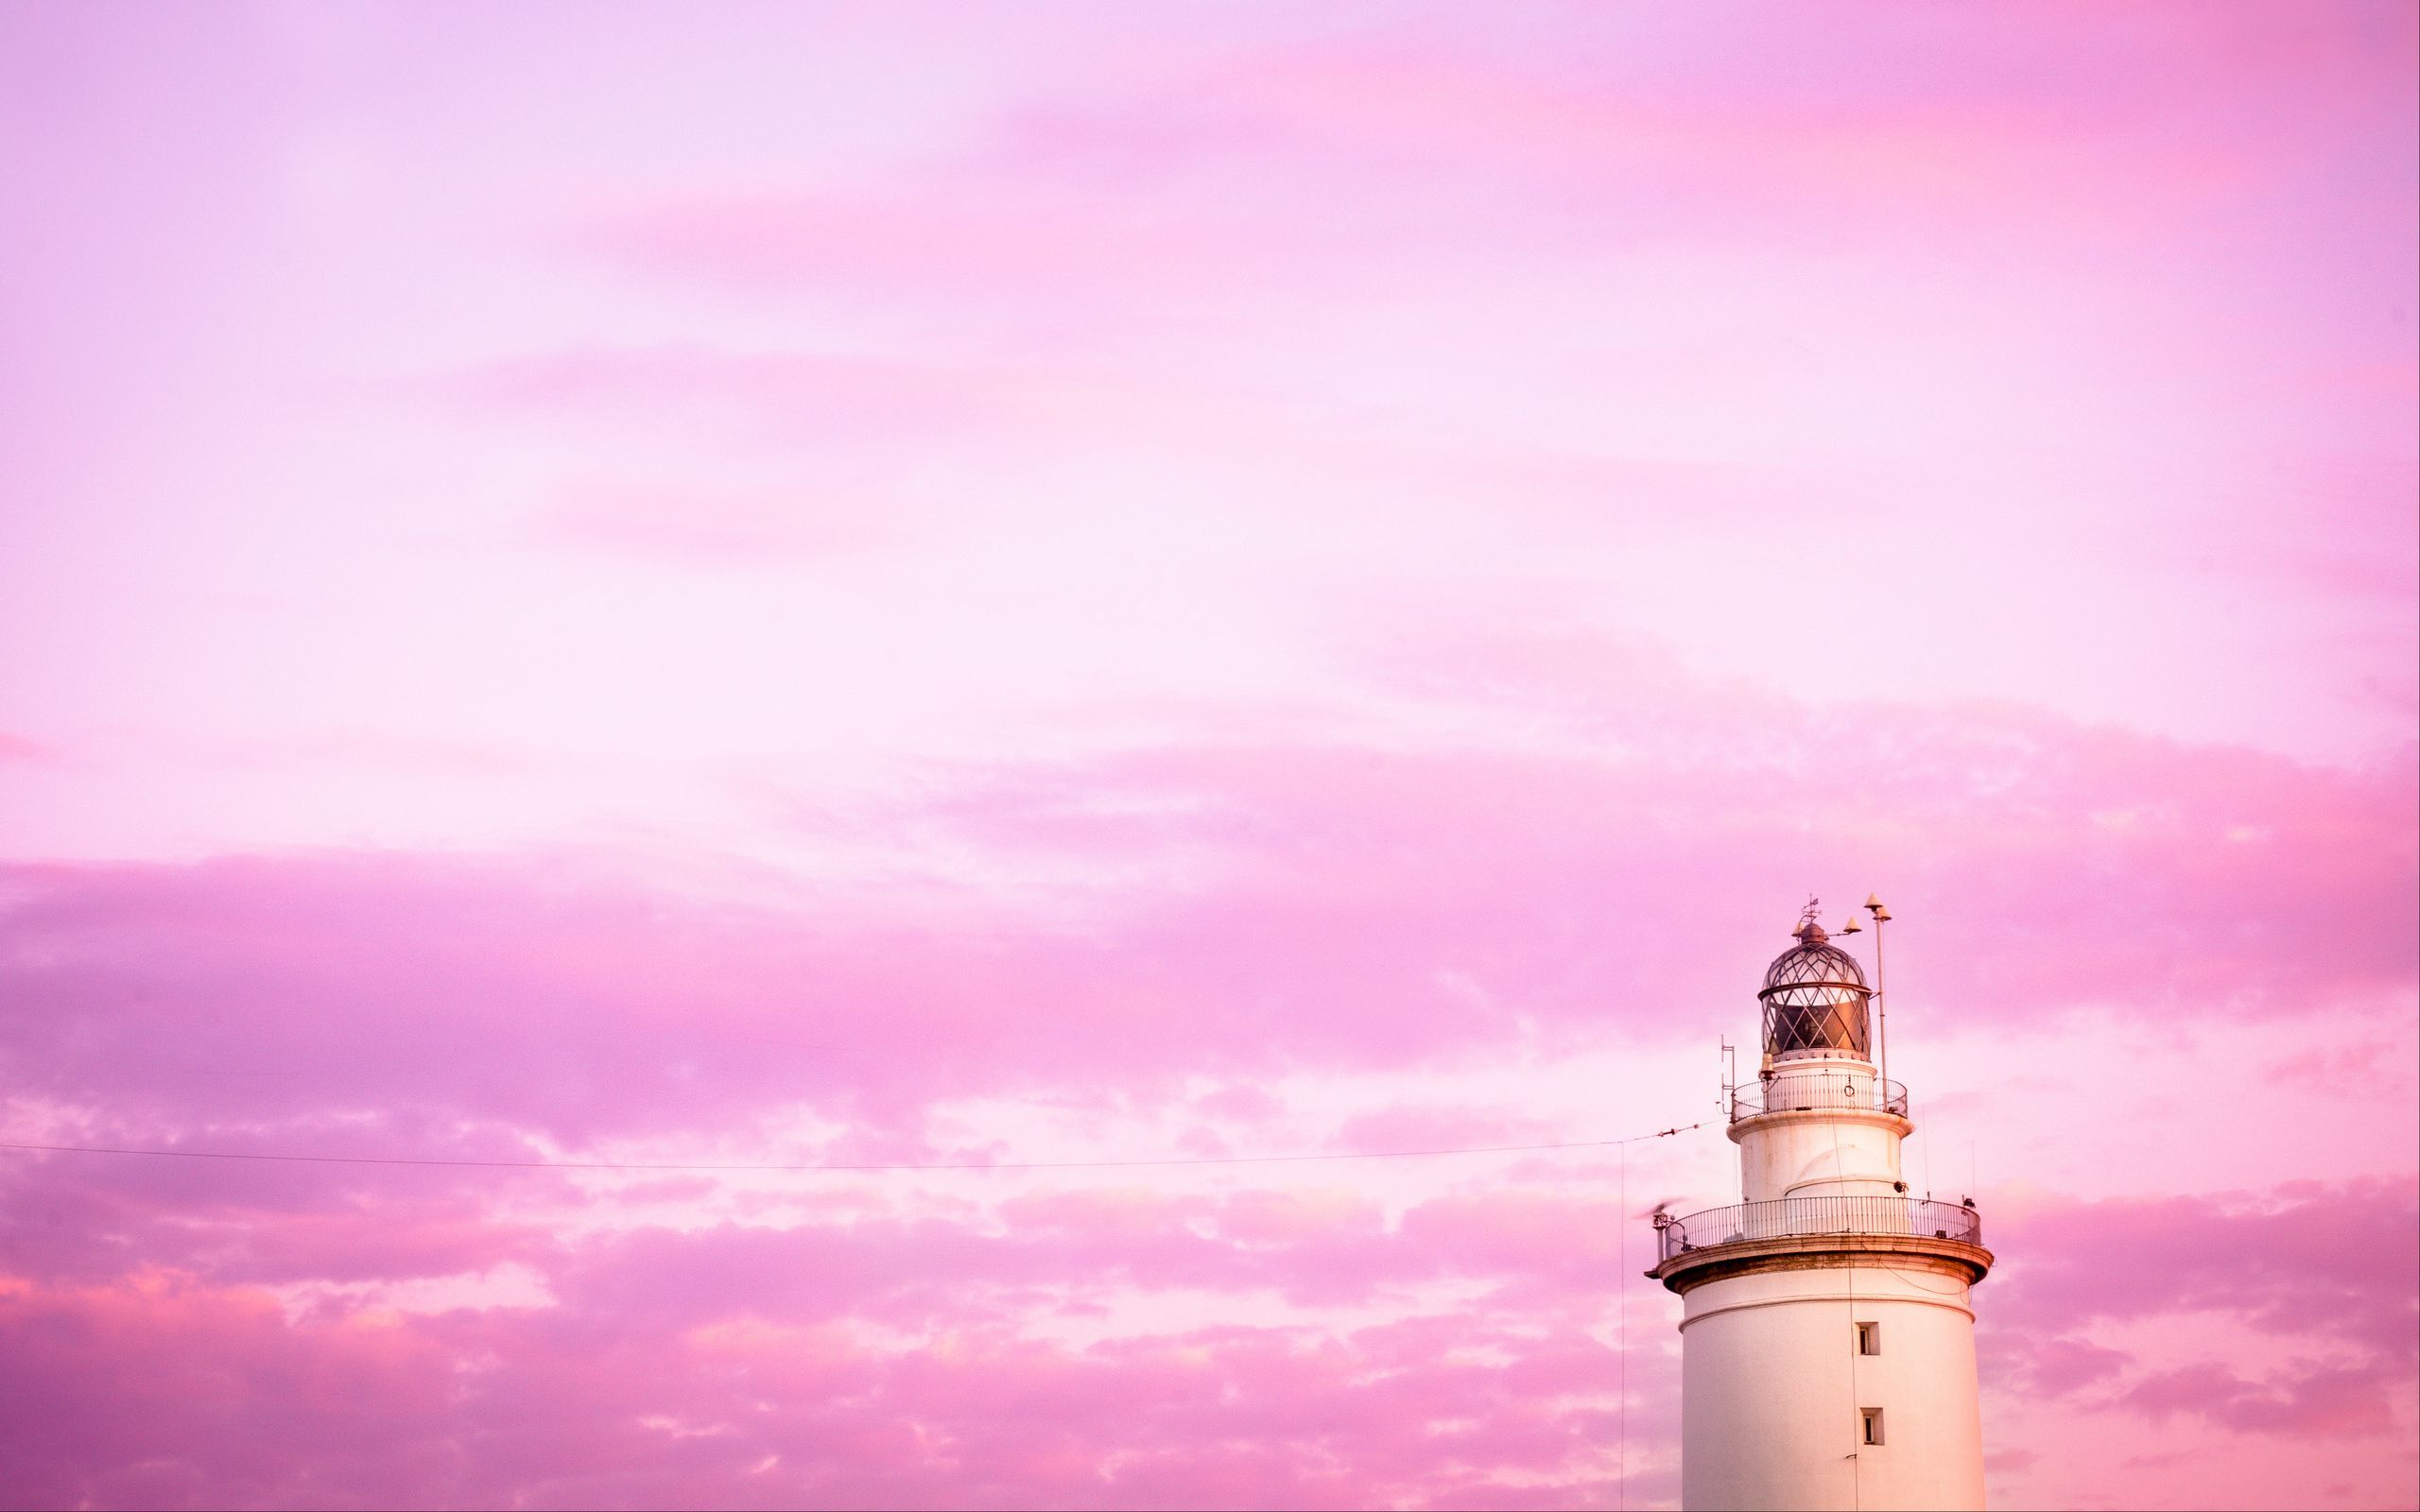 Download wallpaper 2560x1600 lighthouse, clouds, sky, pink